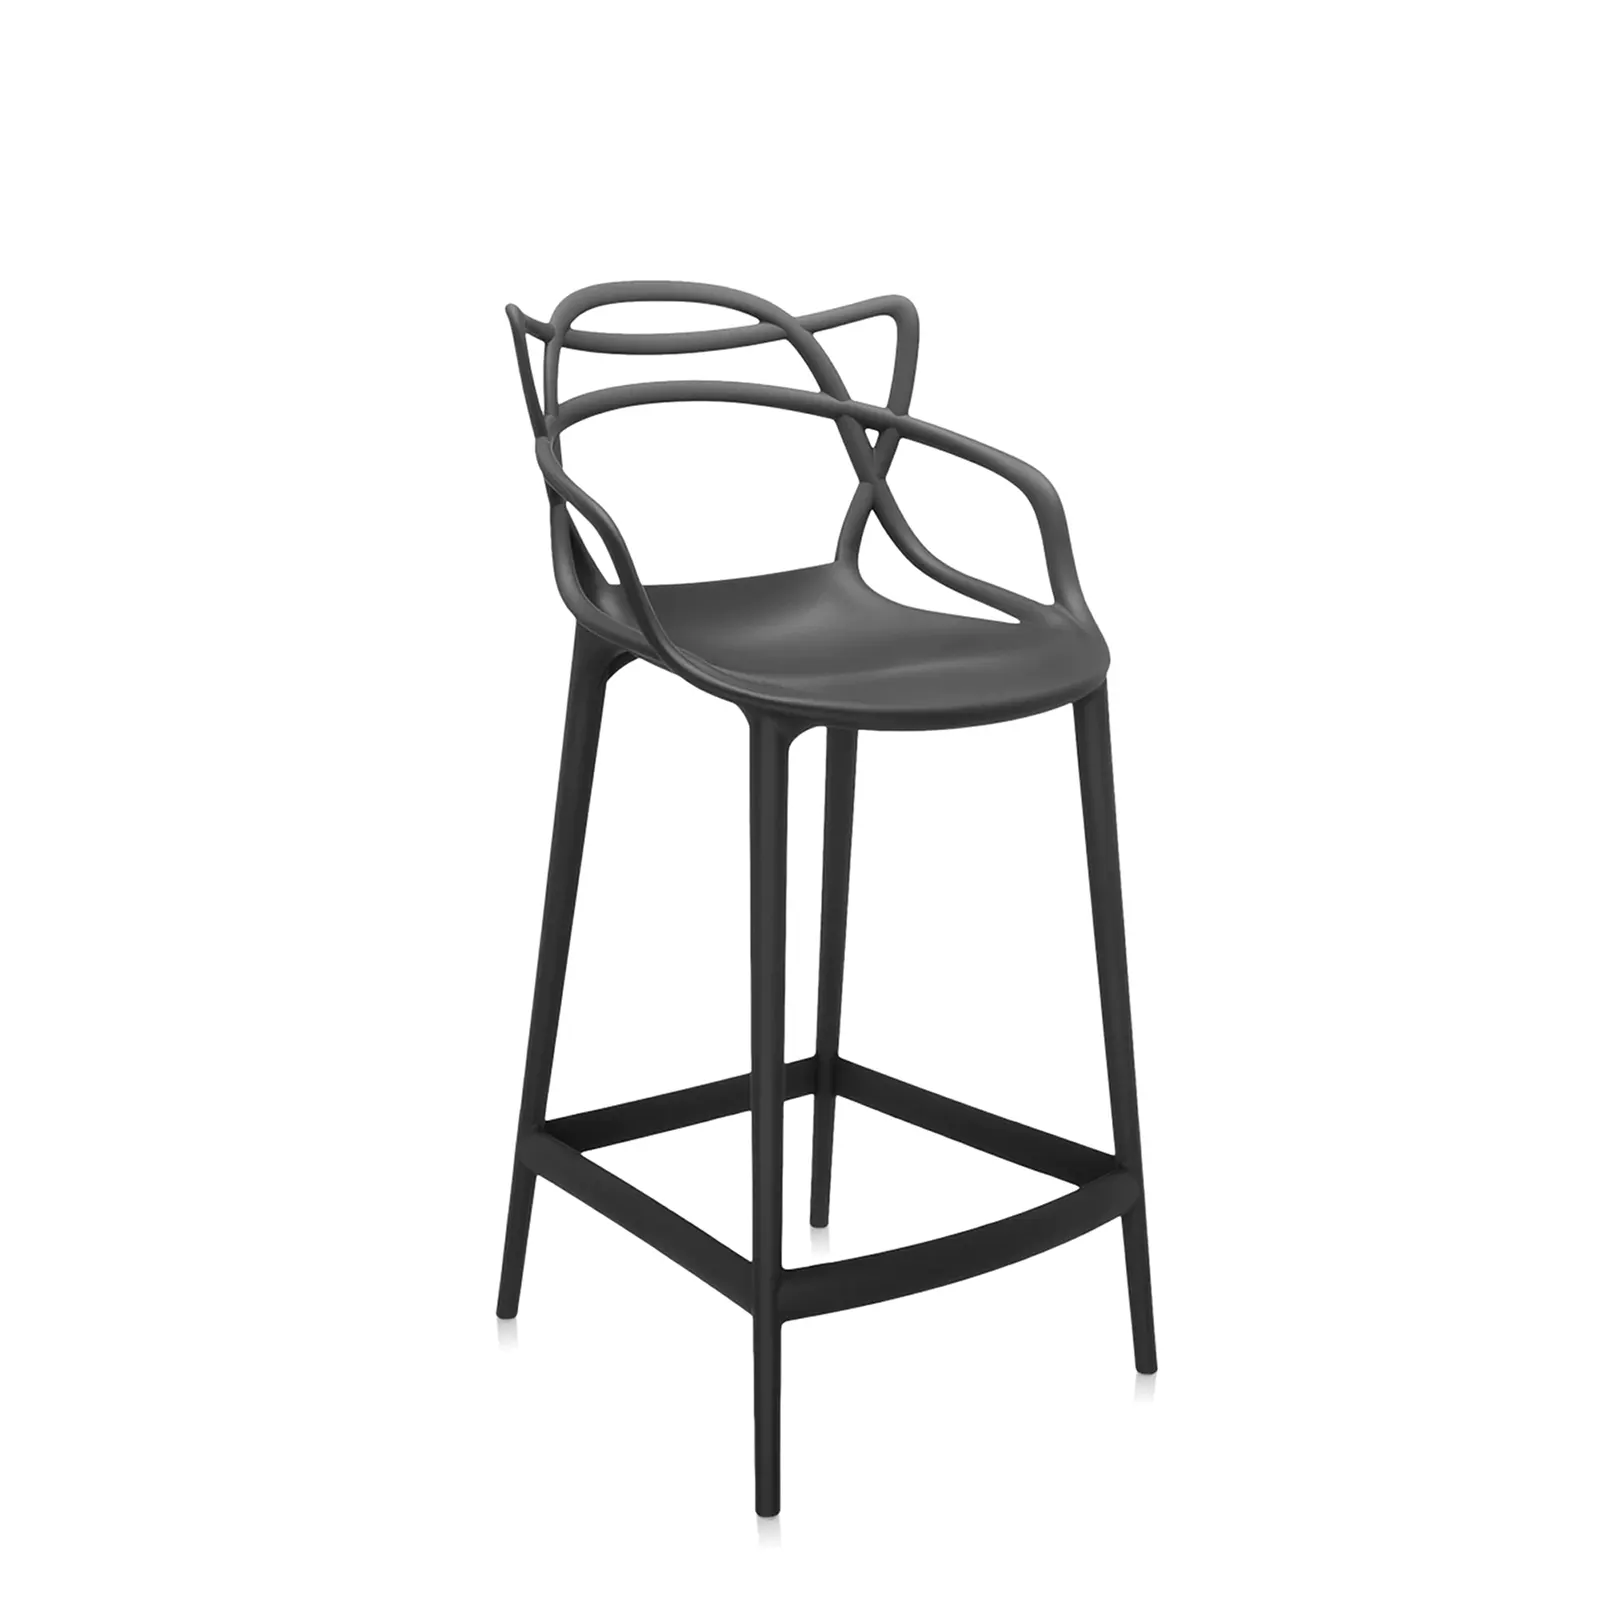 MASTERS STOOL H.75 COLOR NEGRO 05868/09